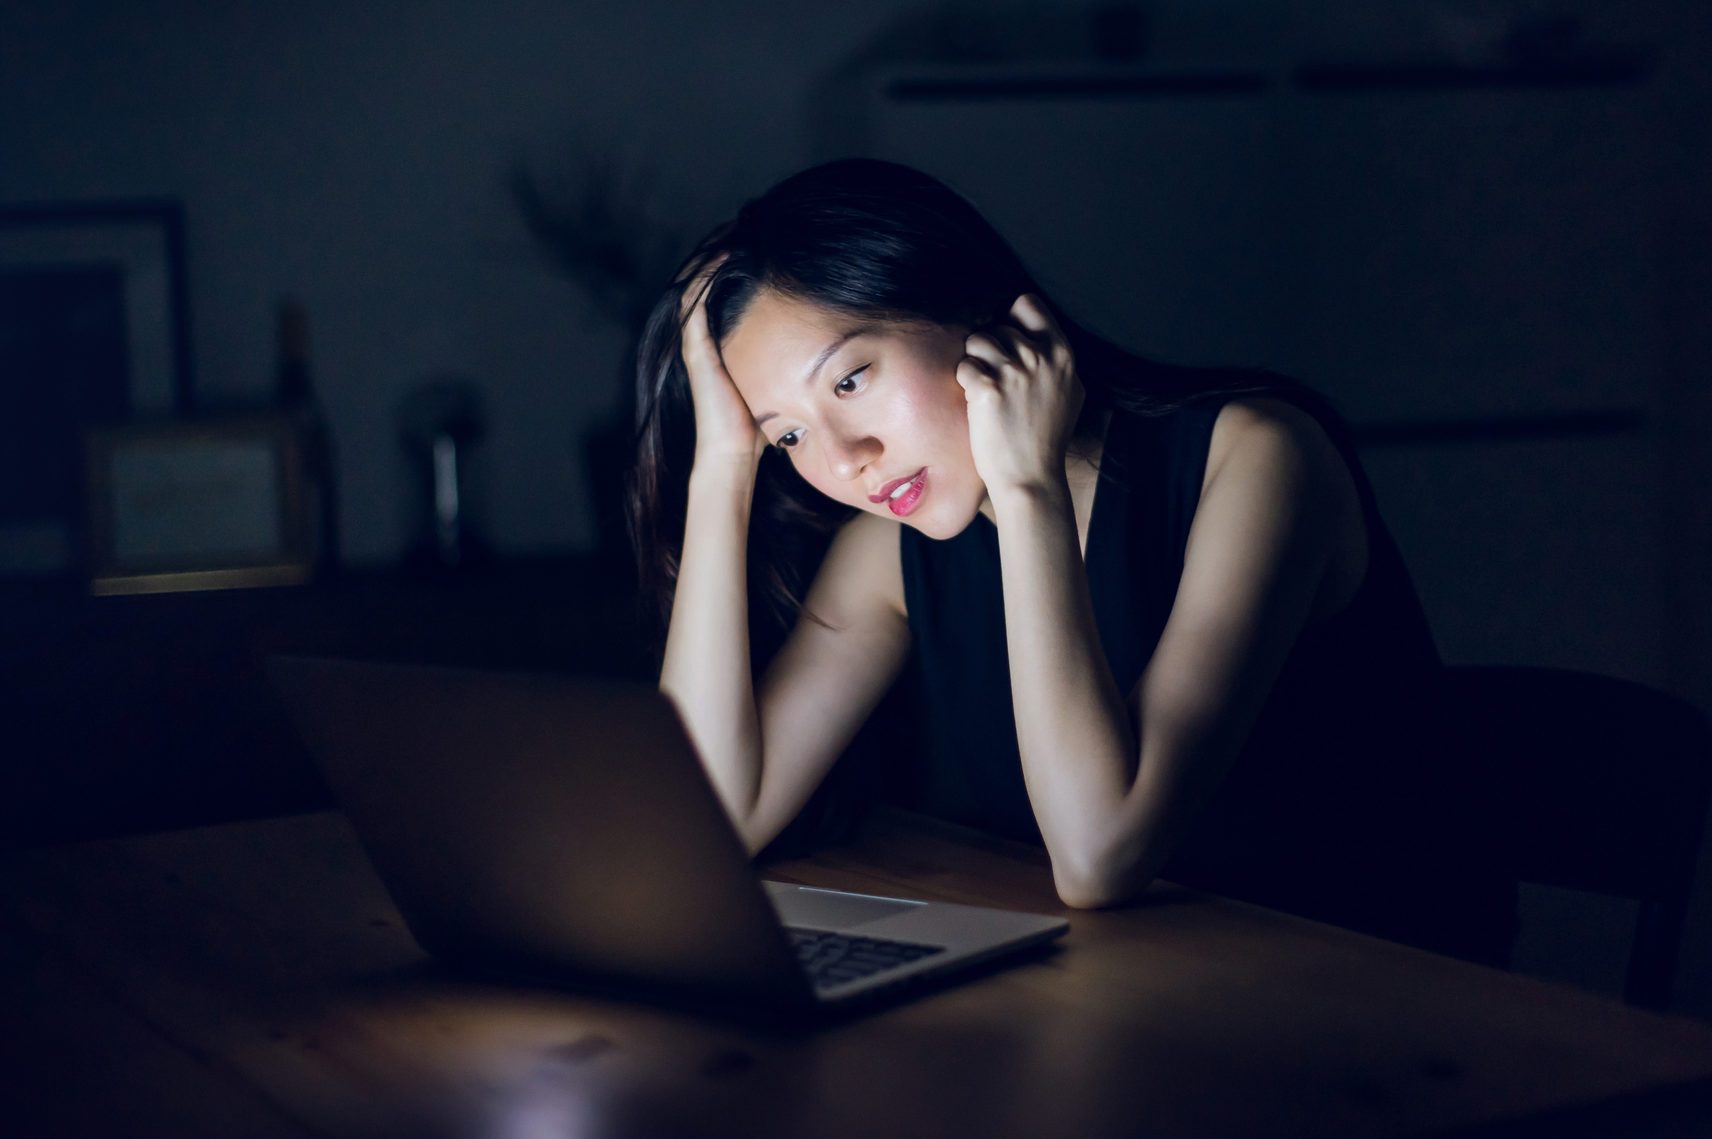 Stressed and frustrated businesswoman working on laptop till late at work